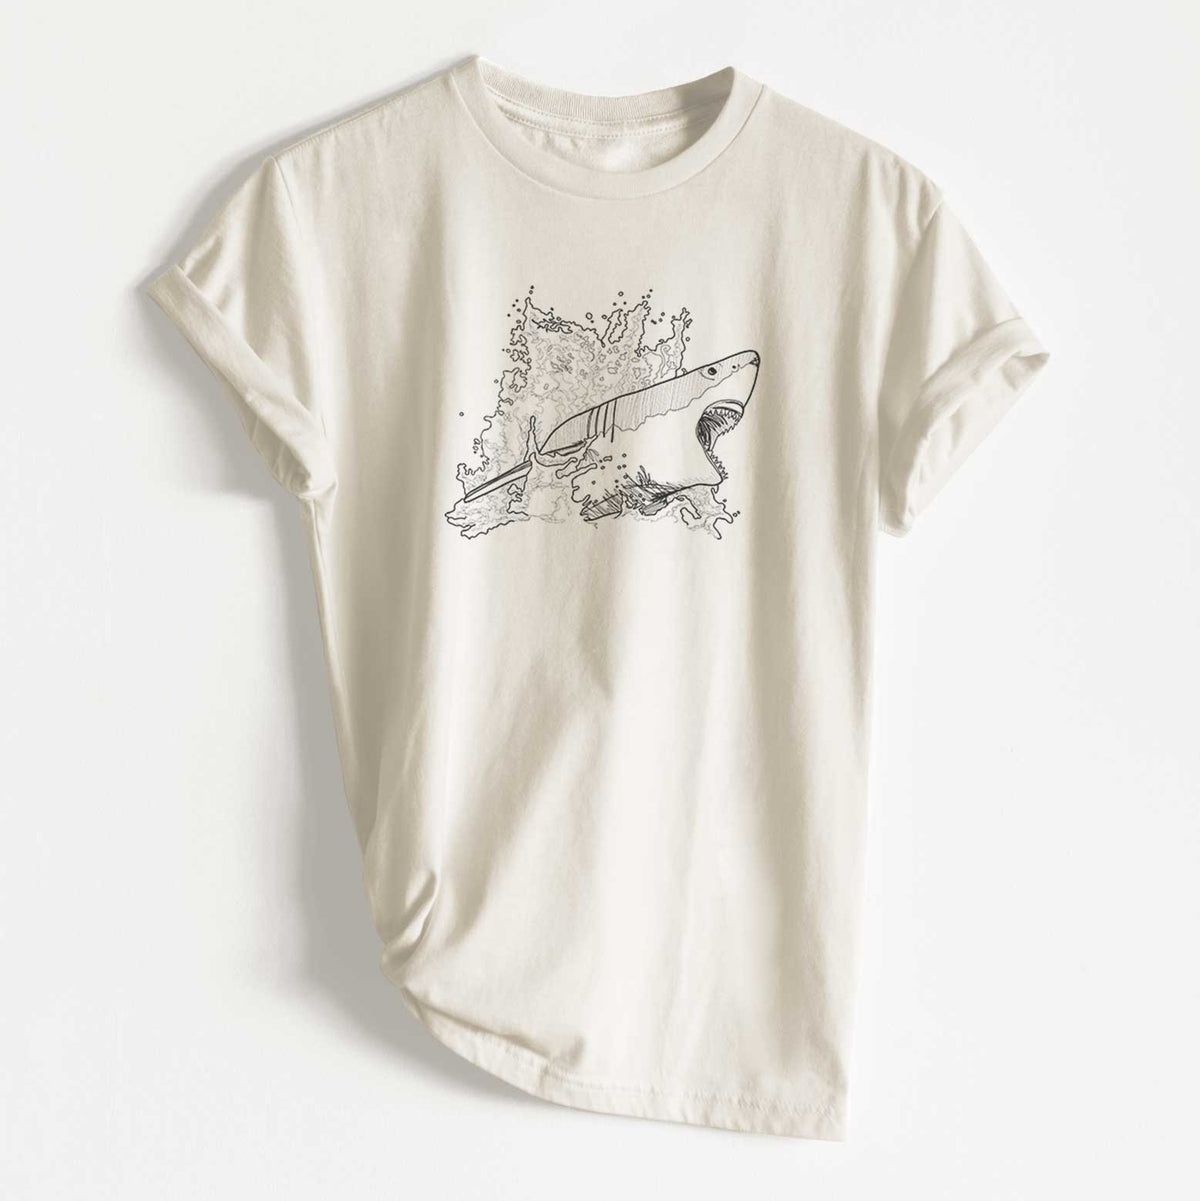 Great White Shark in Water - Unisex Recycled Eco Tee  - CLOSEOUT - FINAL SALE